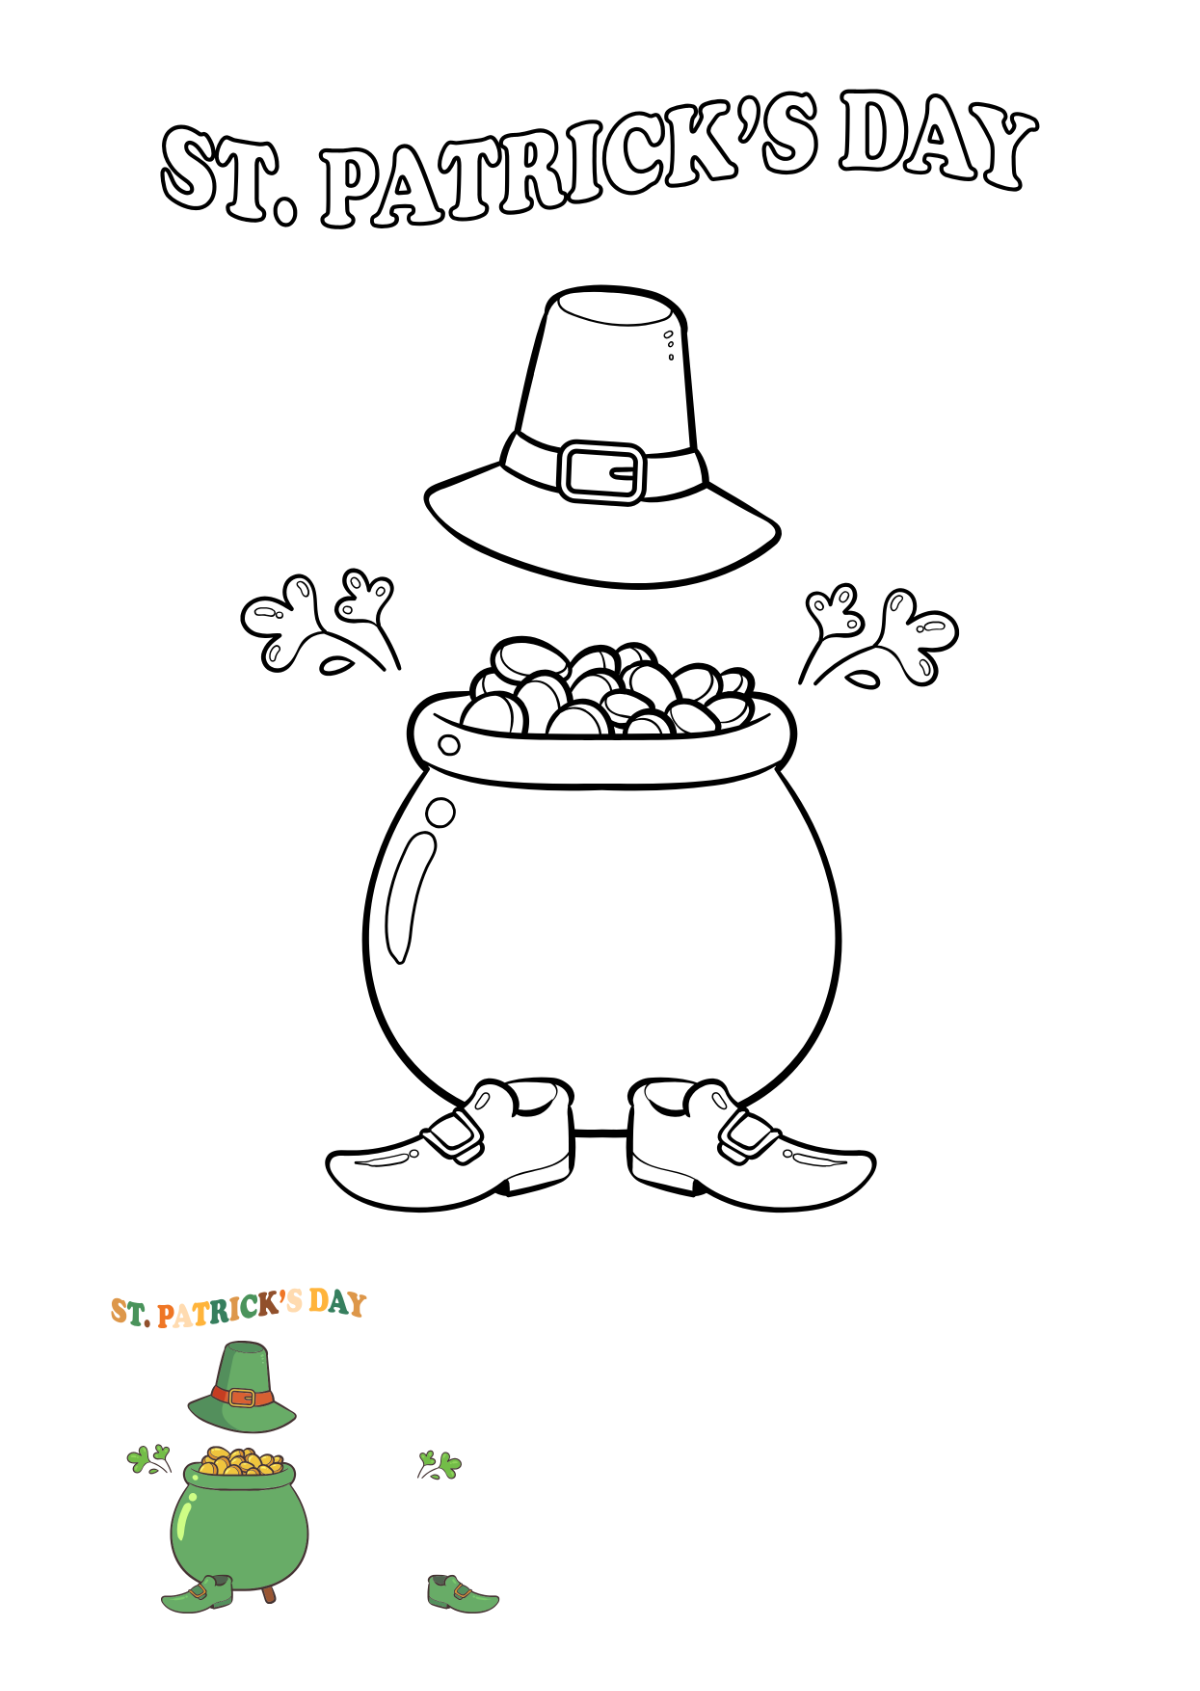 St. Patrick’s Day Coloring Page for Kids Template